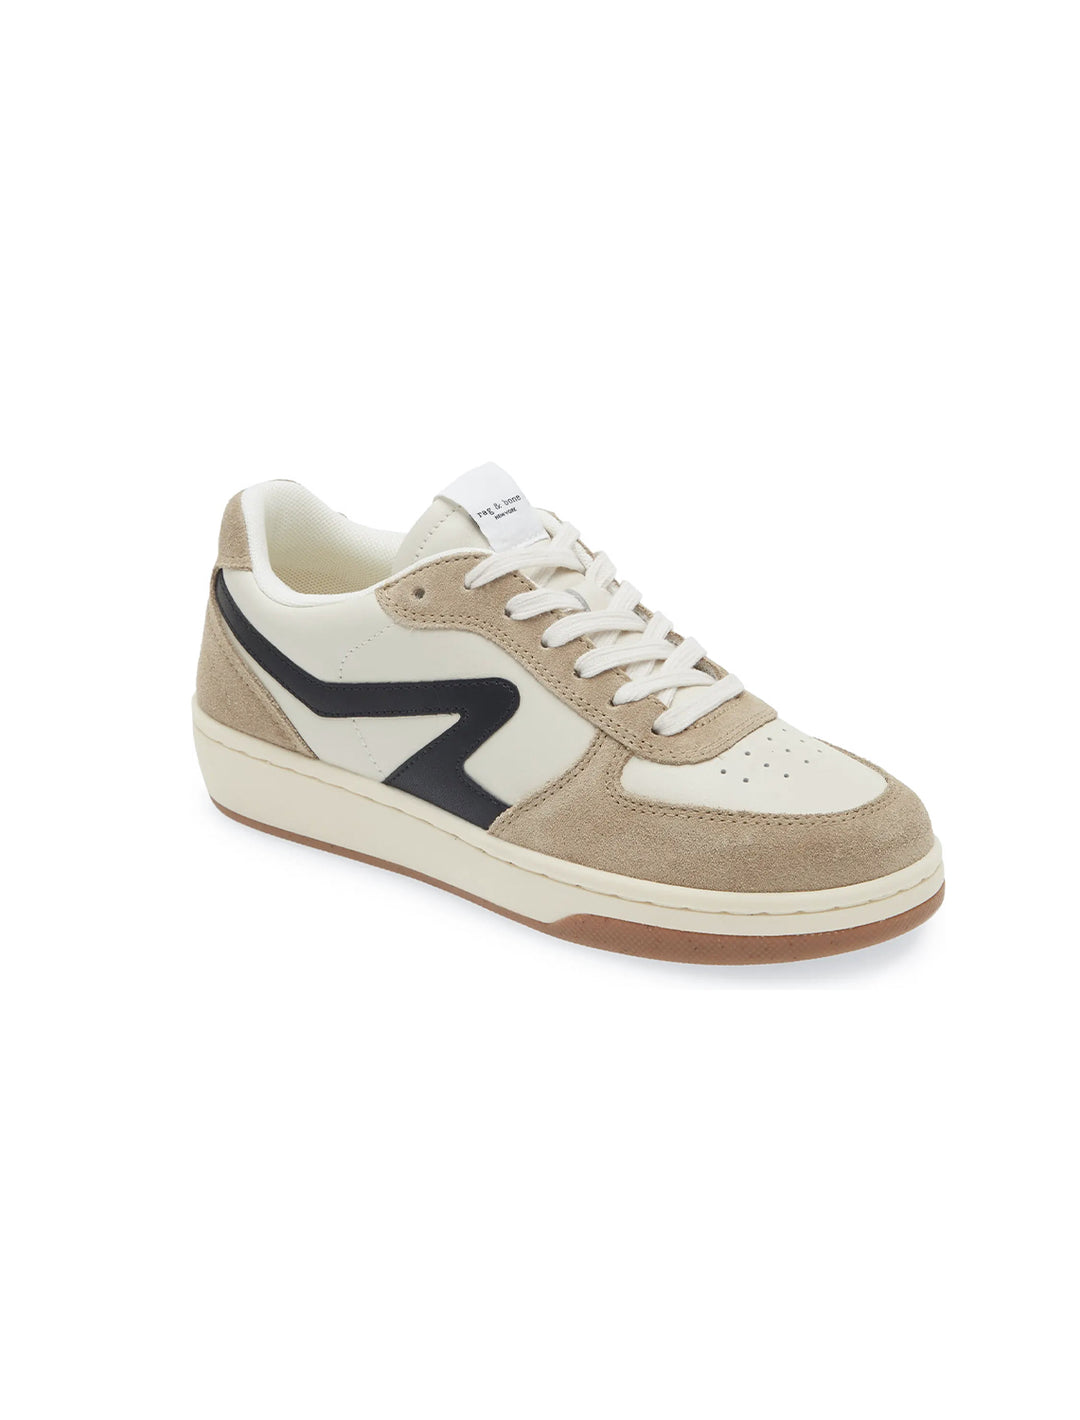 Front angle view of Rag & Bone's retro court sneaker in dove and sand.